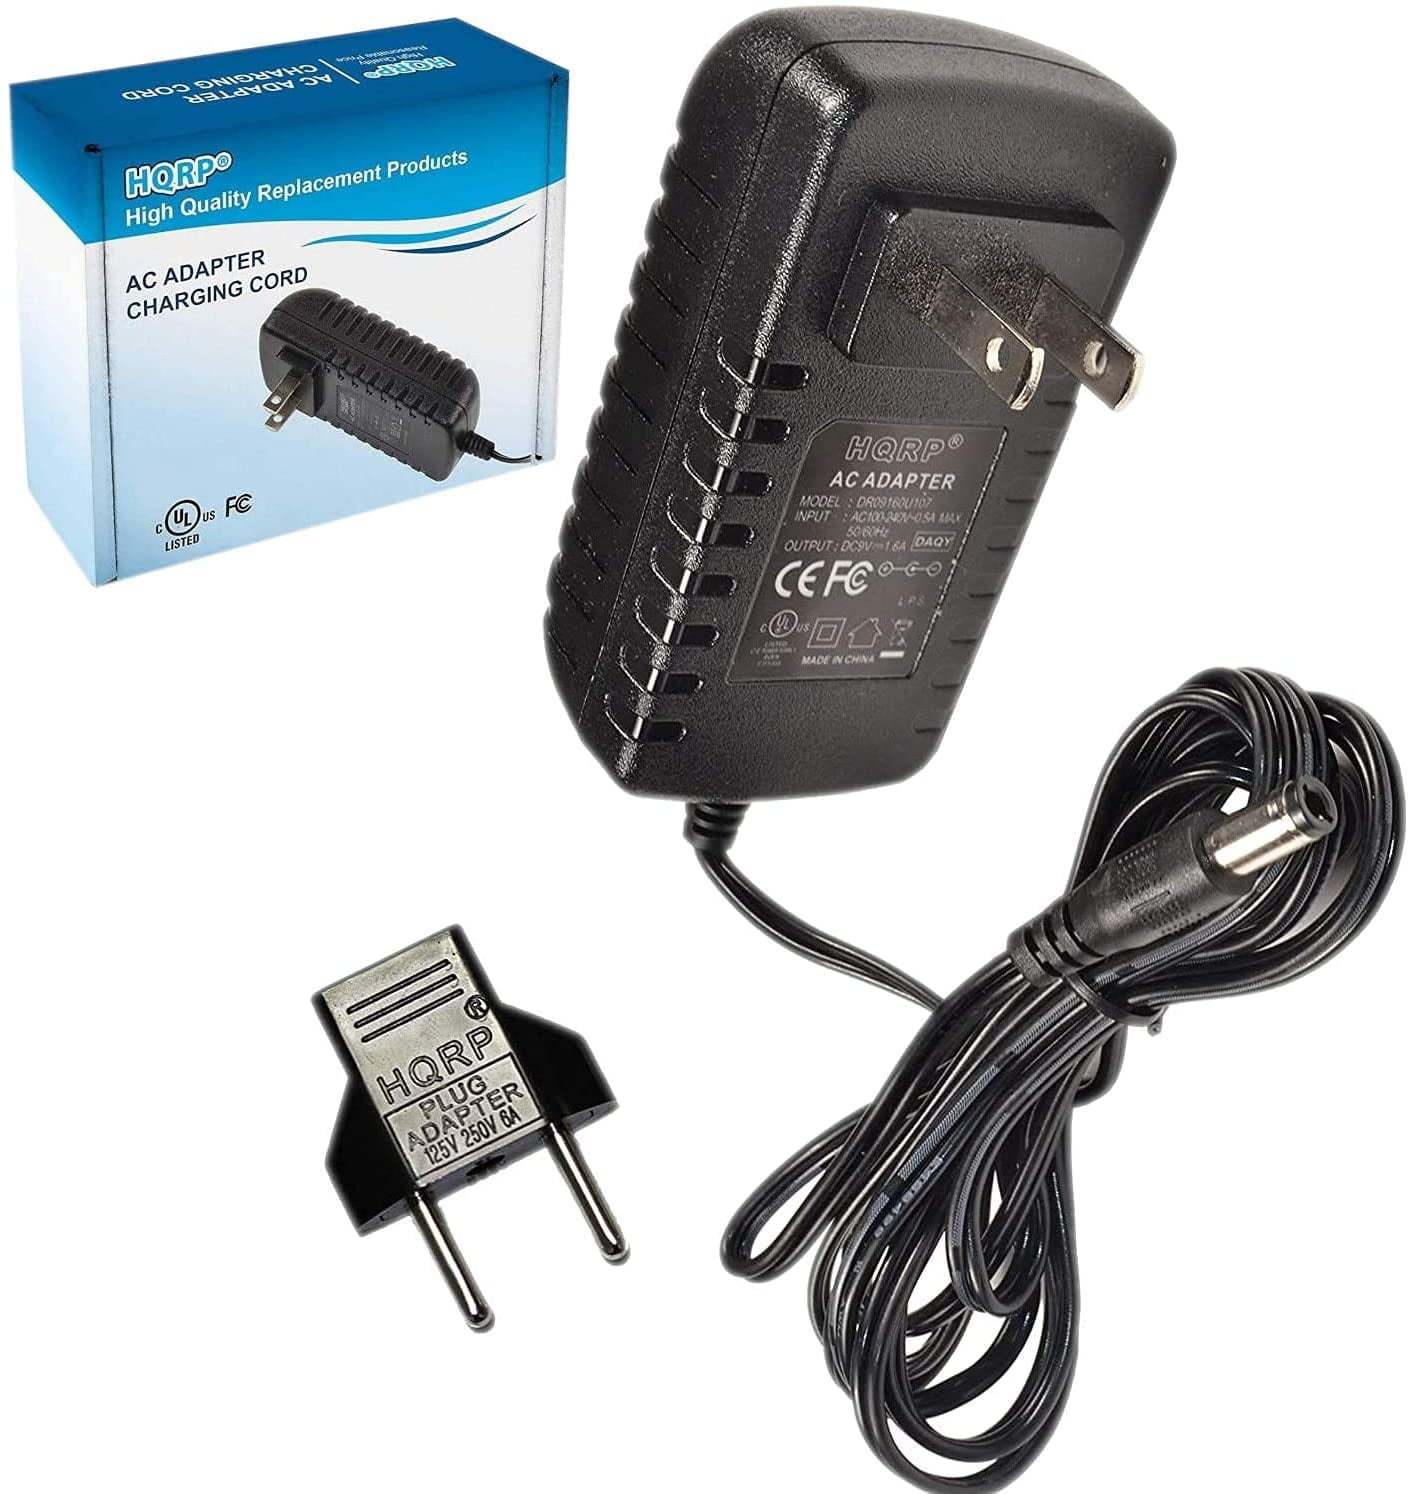 SweeperVac PG-3000 Plant J AC Adapter Charger for Procter Gamble Swiffer Sweep 